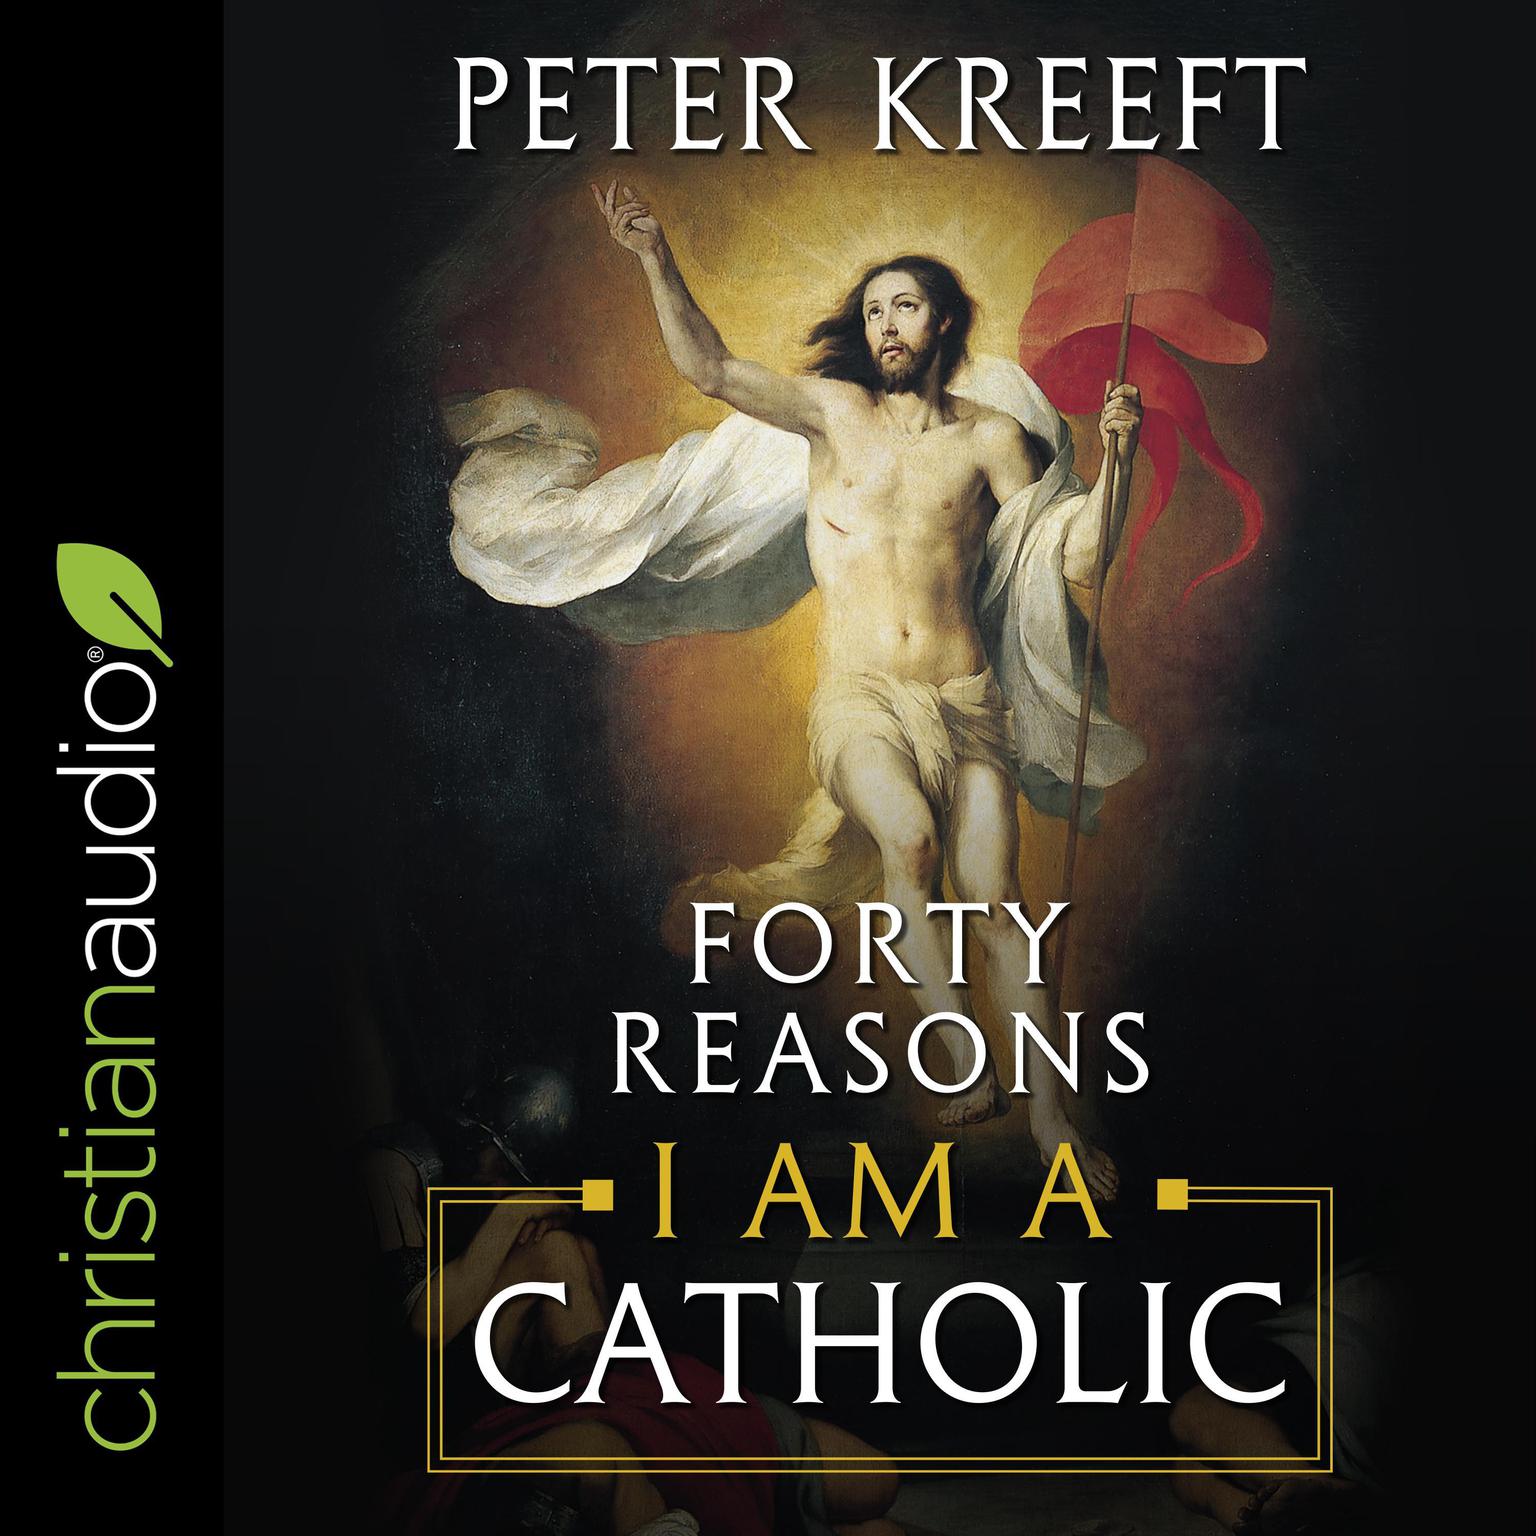 Forty Reasons I Am a Catholic Audiobook, by Peter Kreeft